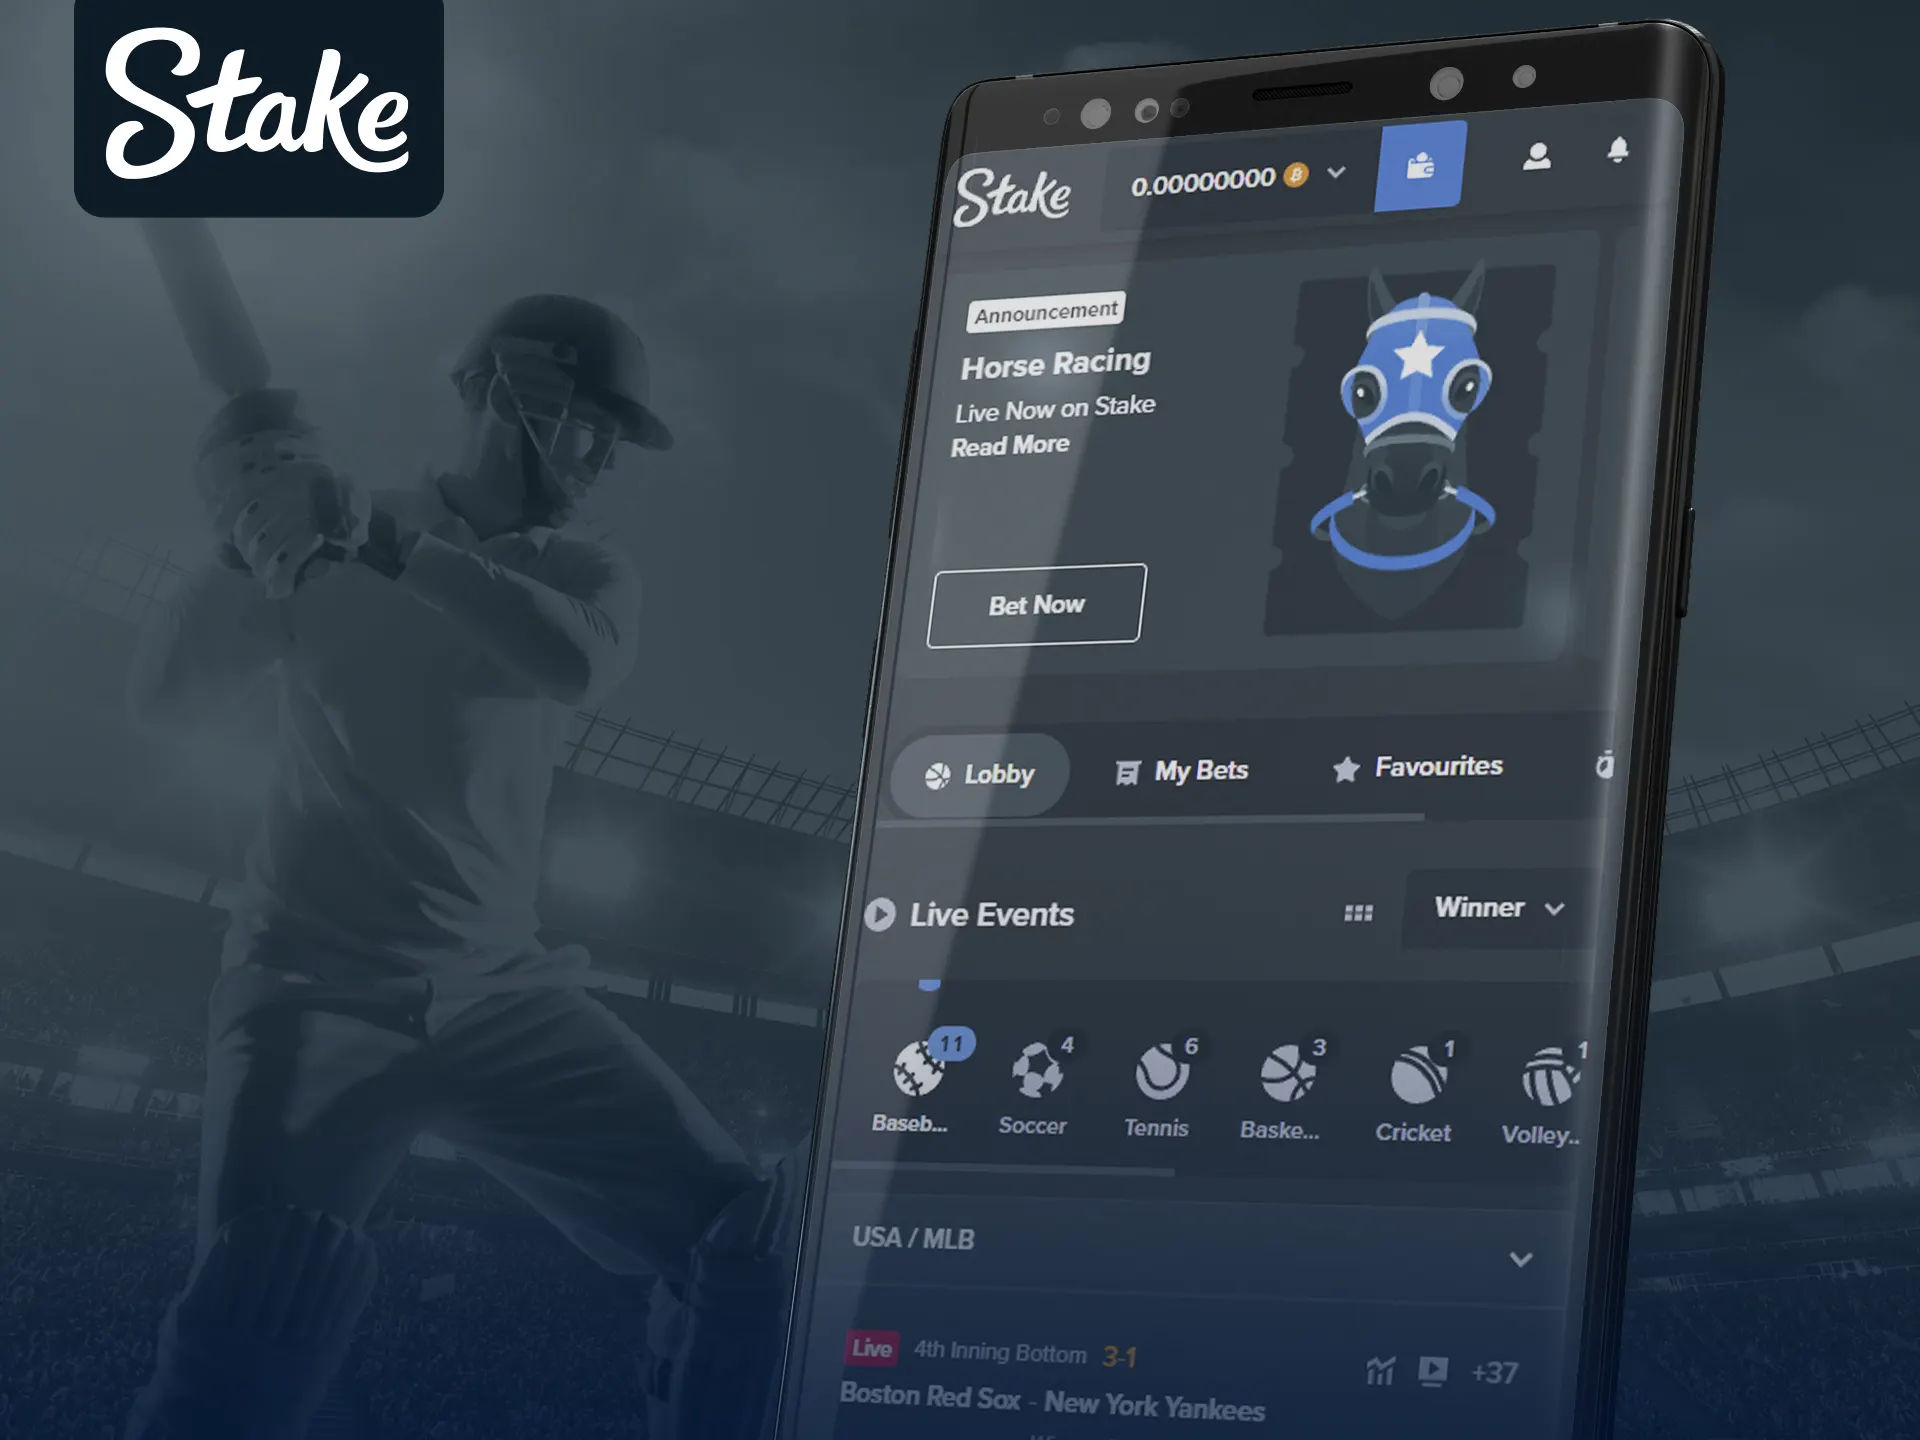 Stake mobile site offers full app functions.